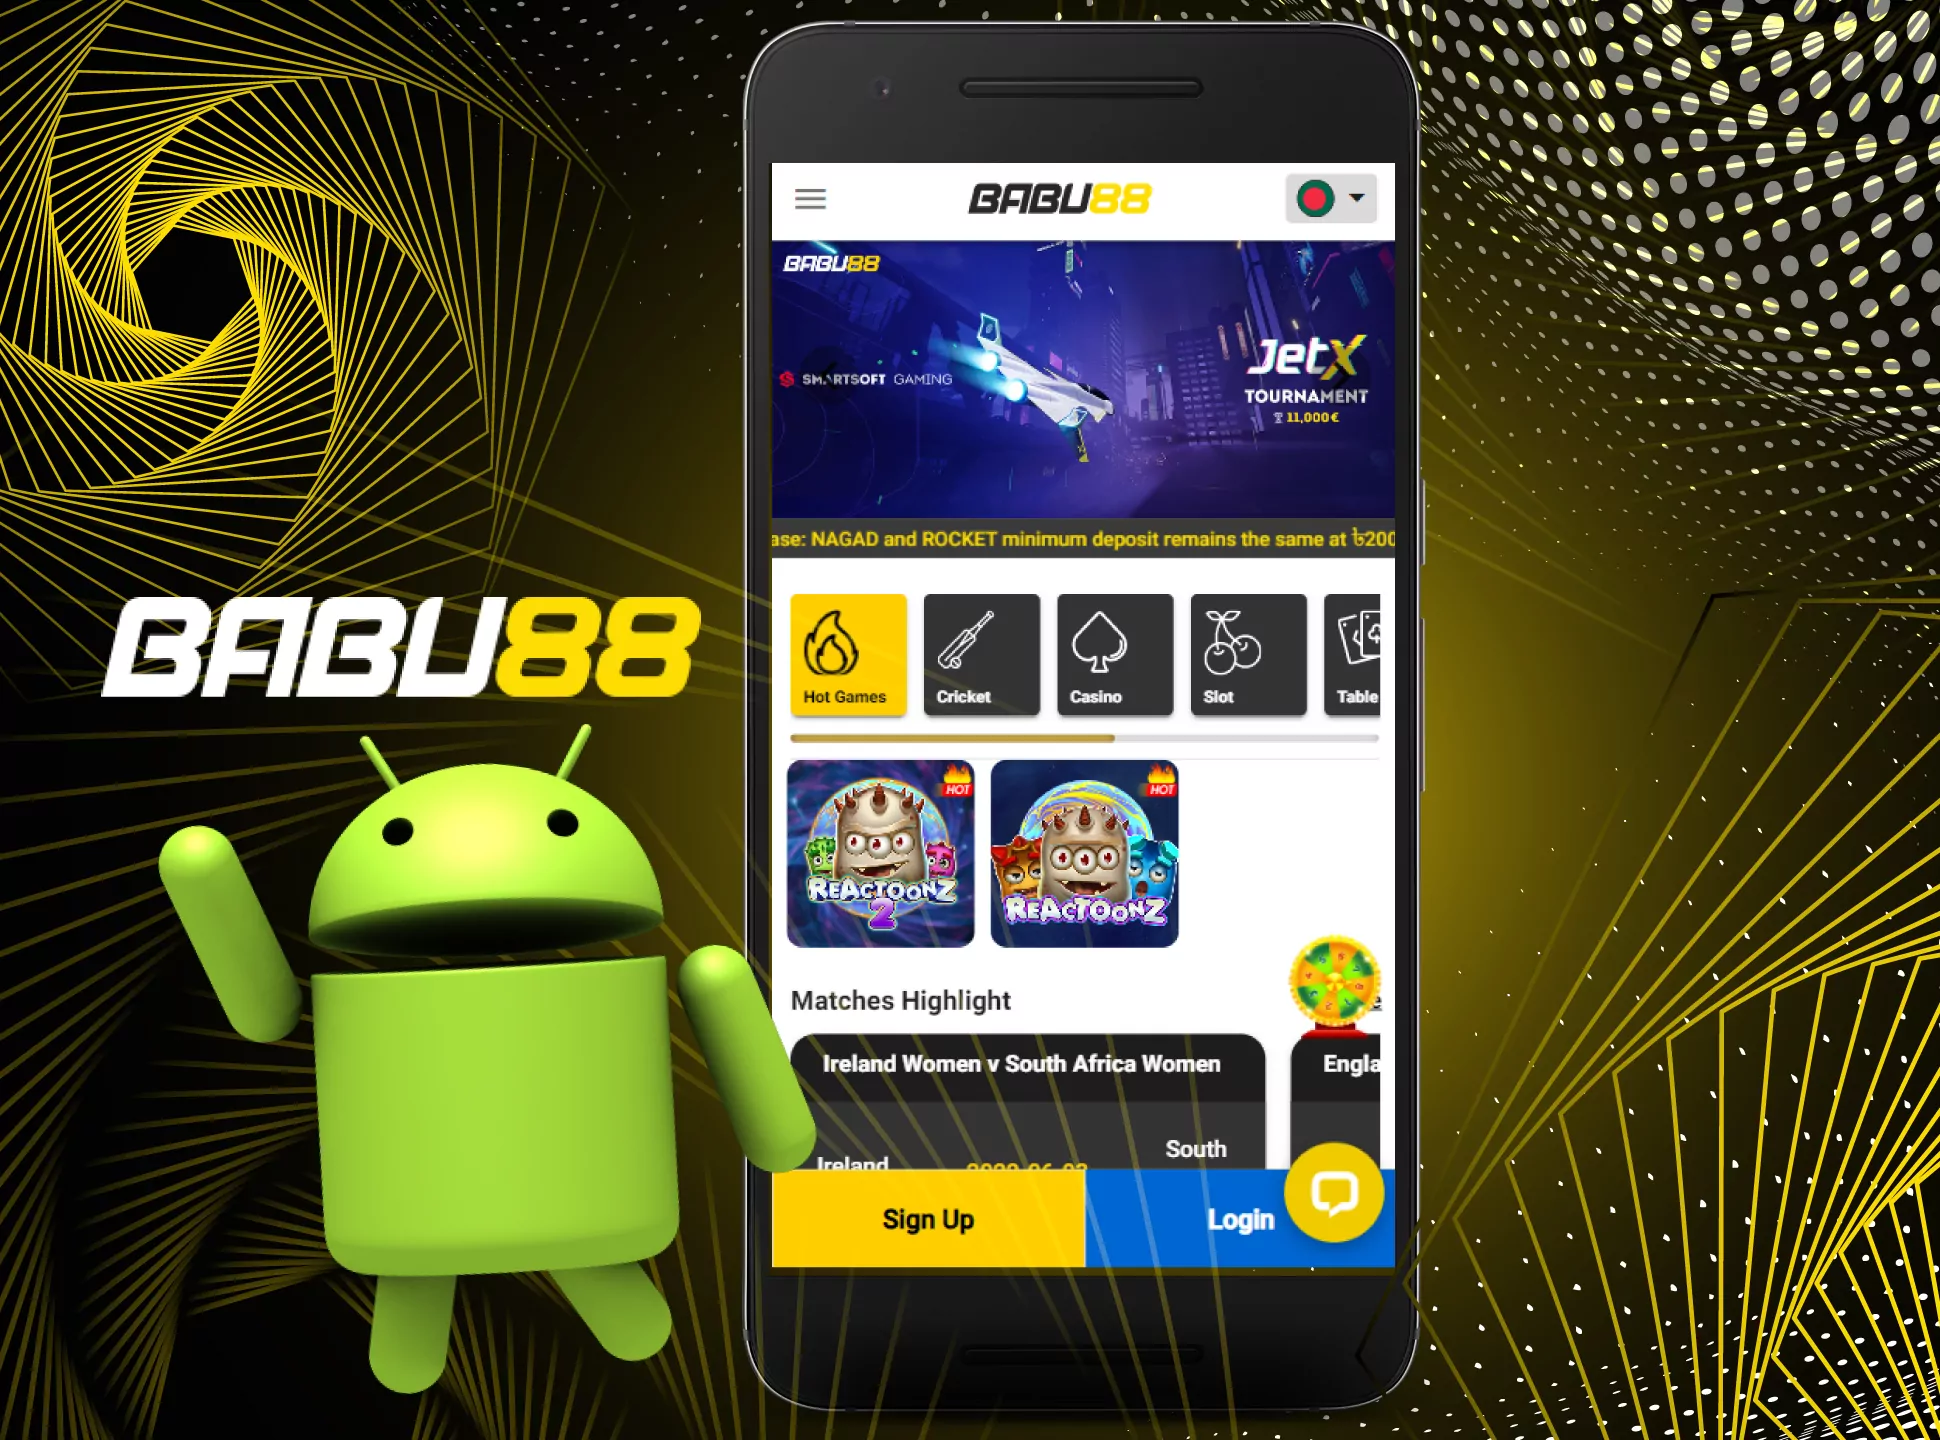 Most of the modern Android devices can run the Babu88 app.